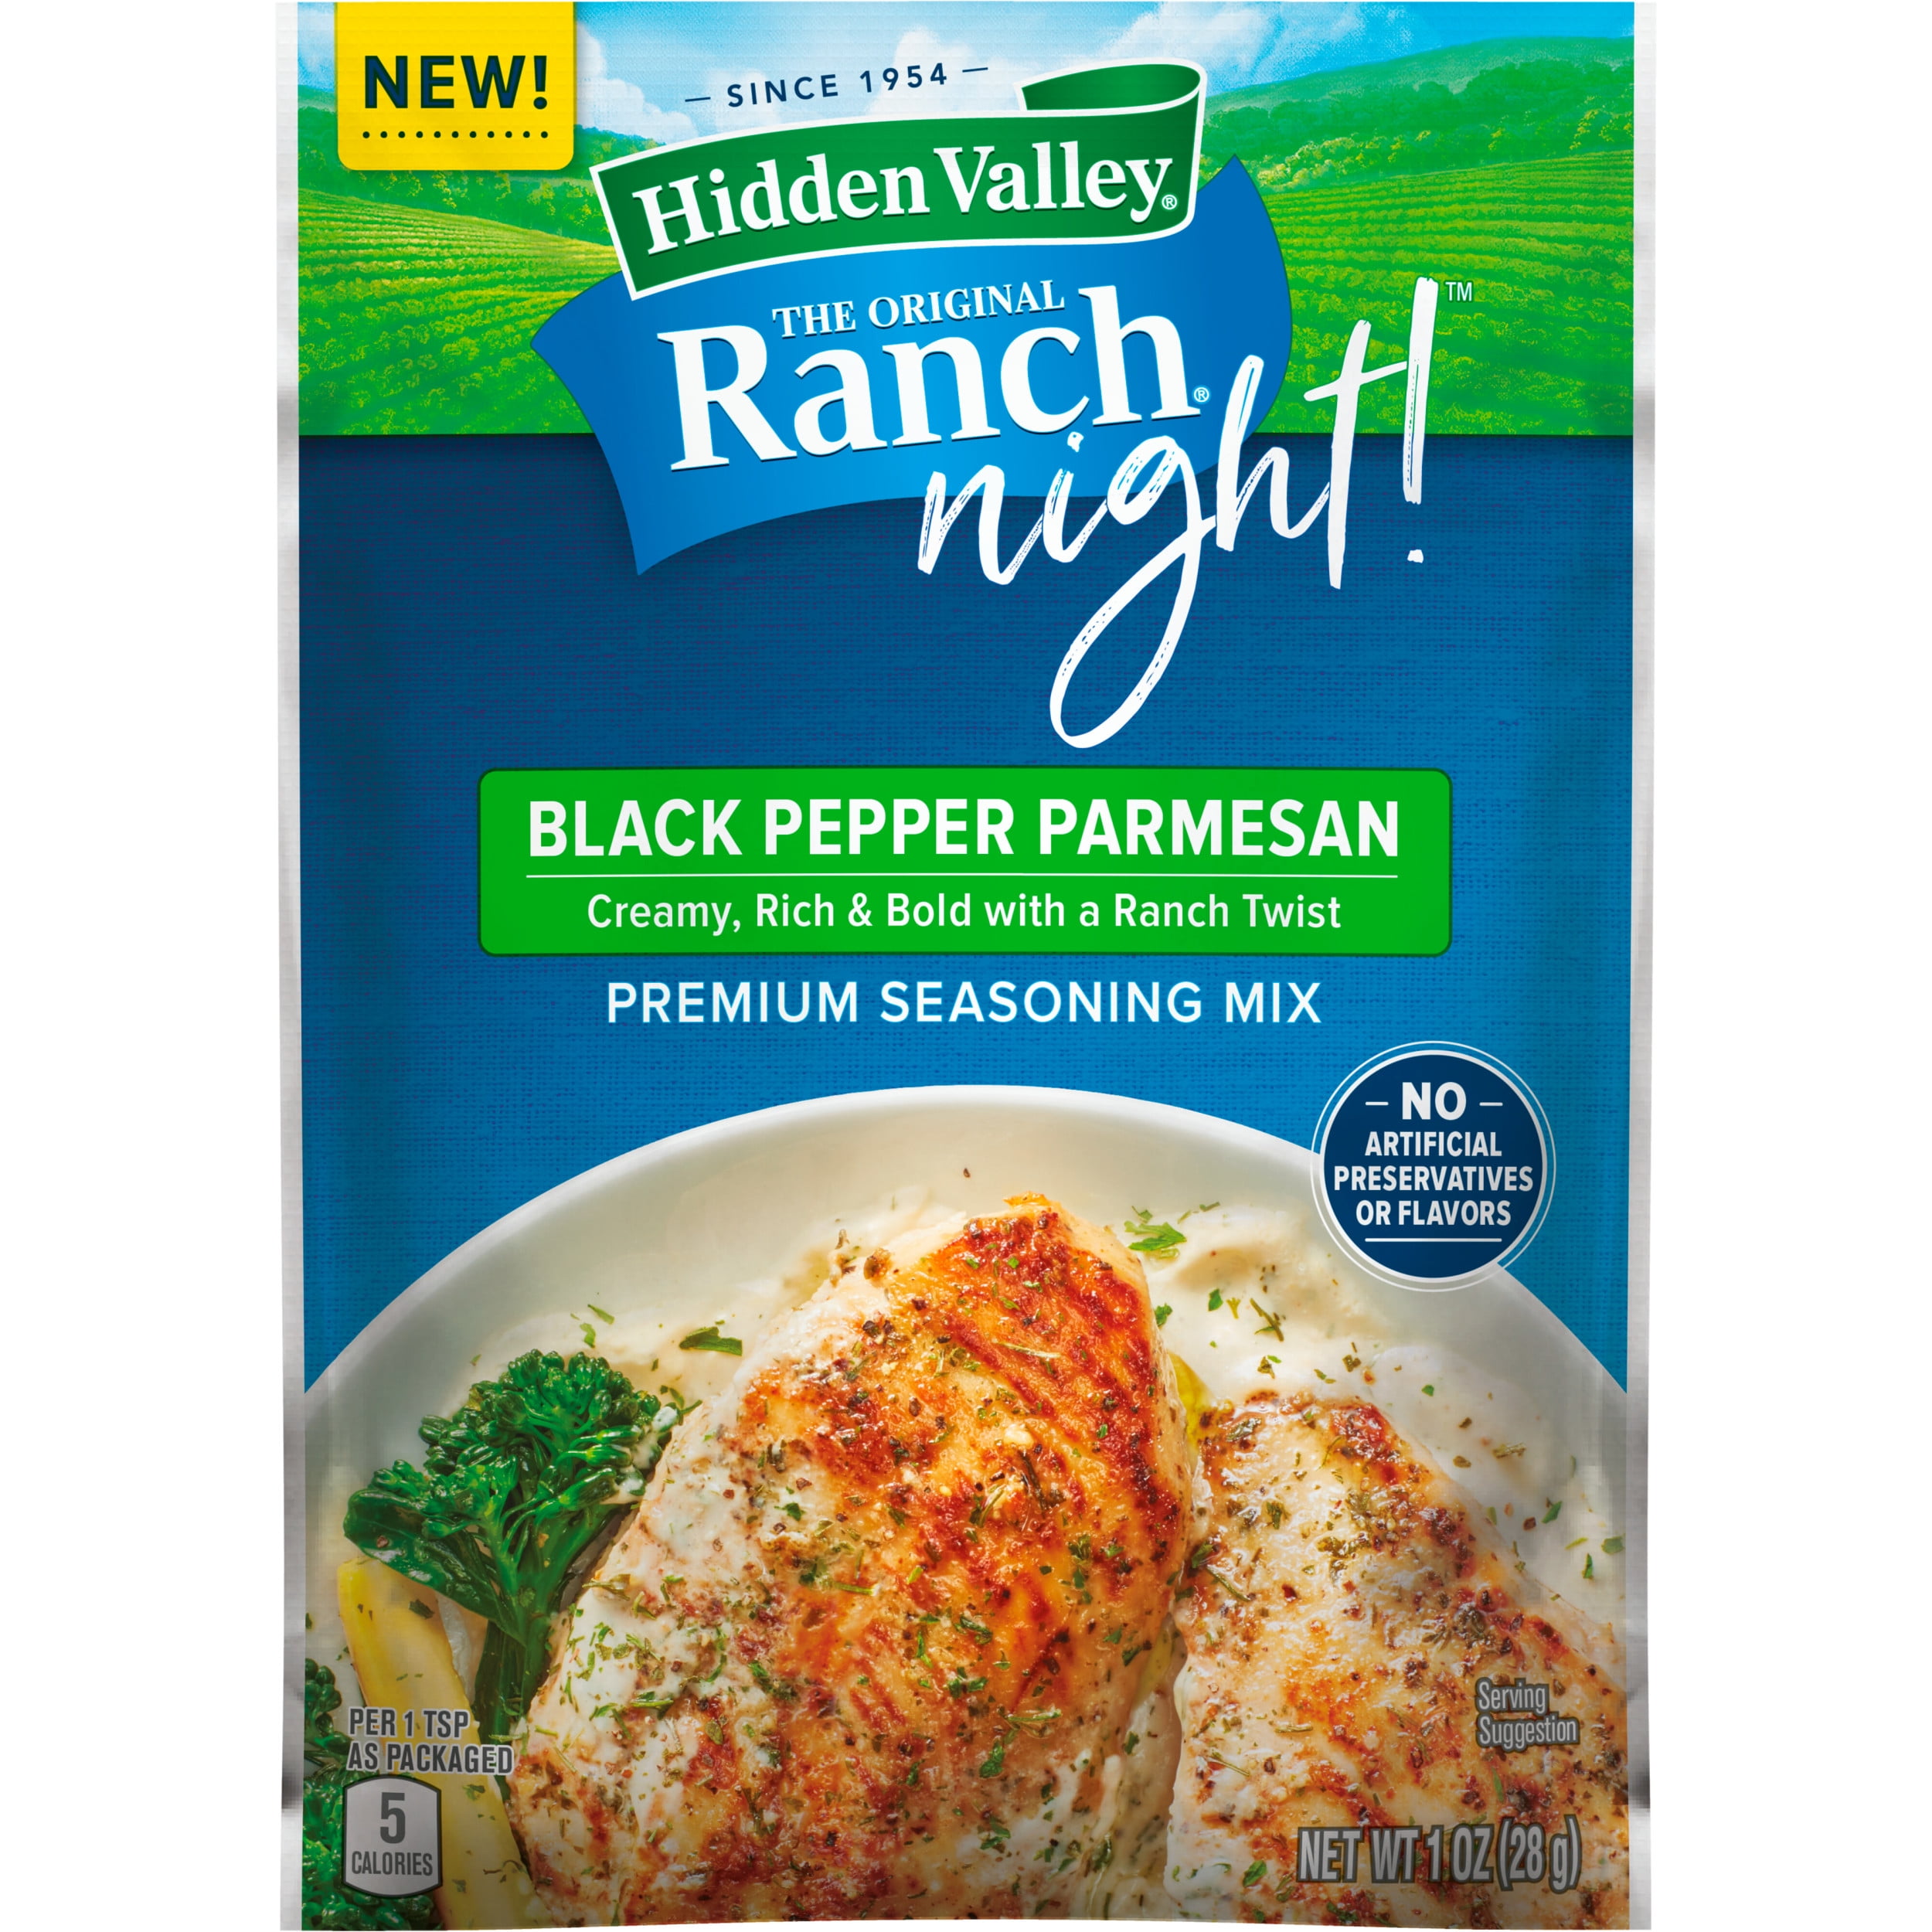 We Tried and Ranked Every Hidden Valley Ranch Product